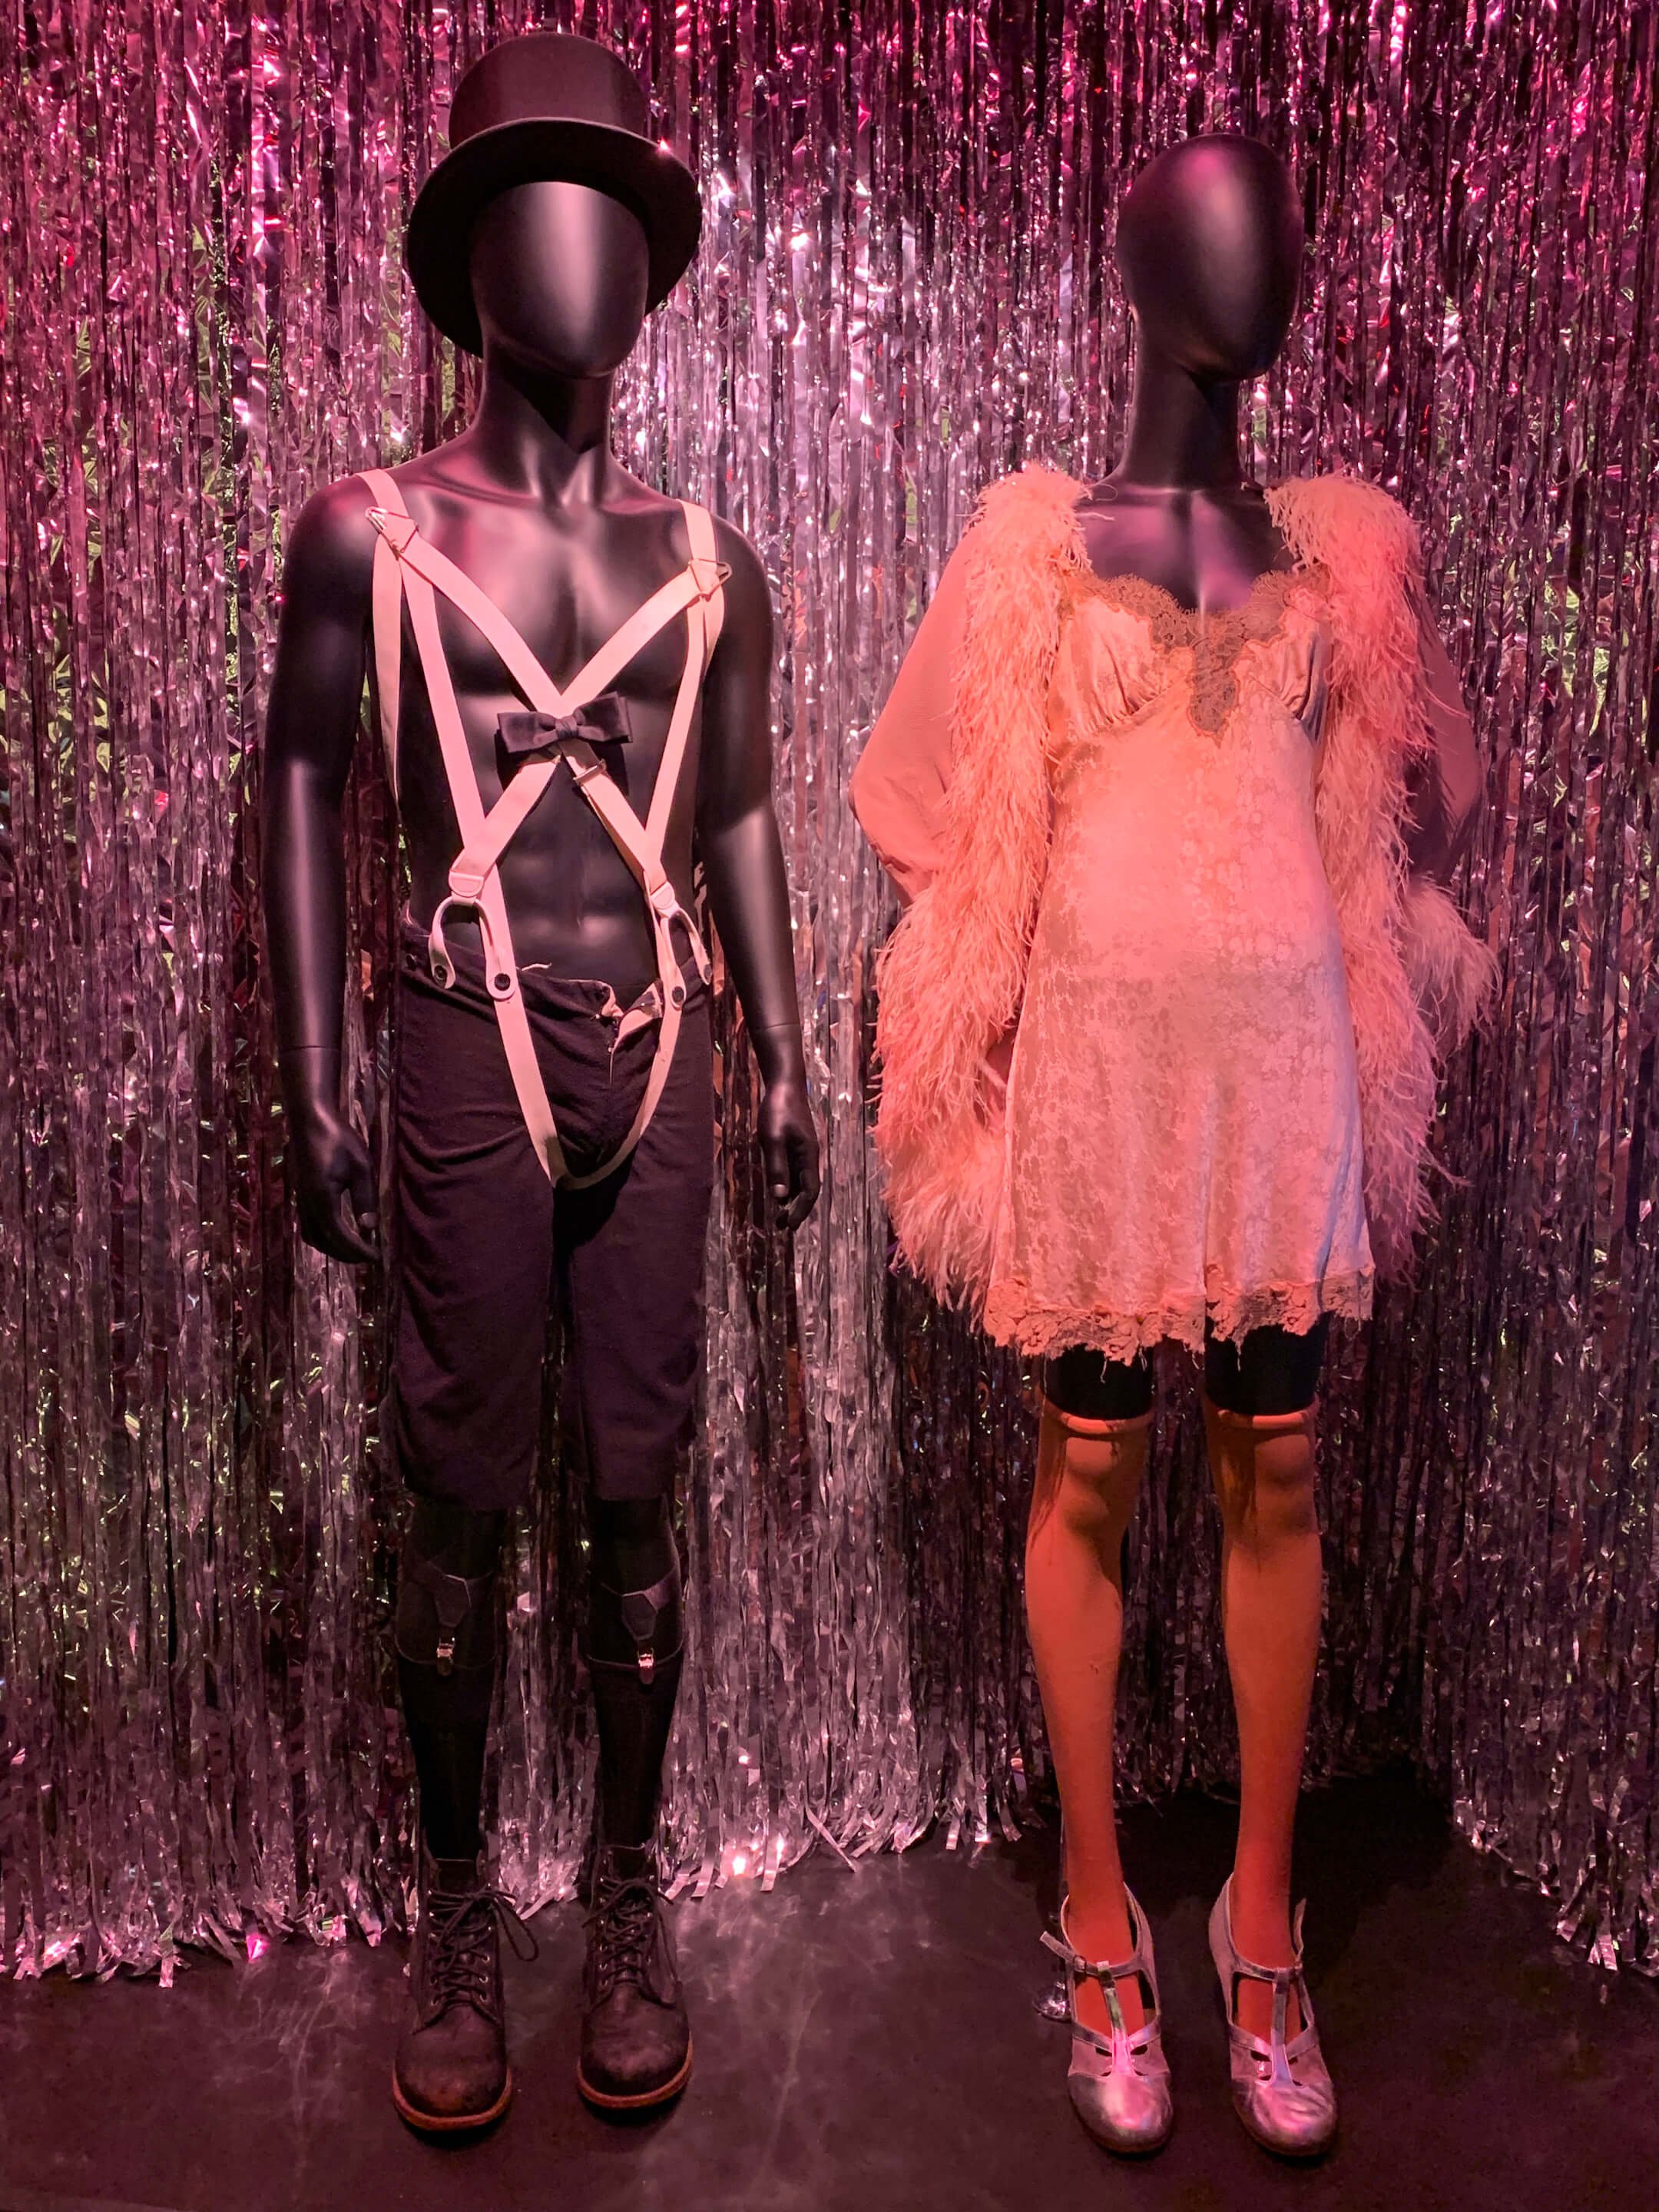  An Emcee (left) and Sally costume from the 1998 revival of  Cabaret   Designed by William Ivey Long 